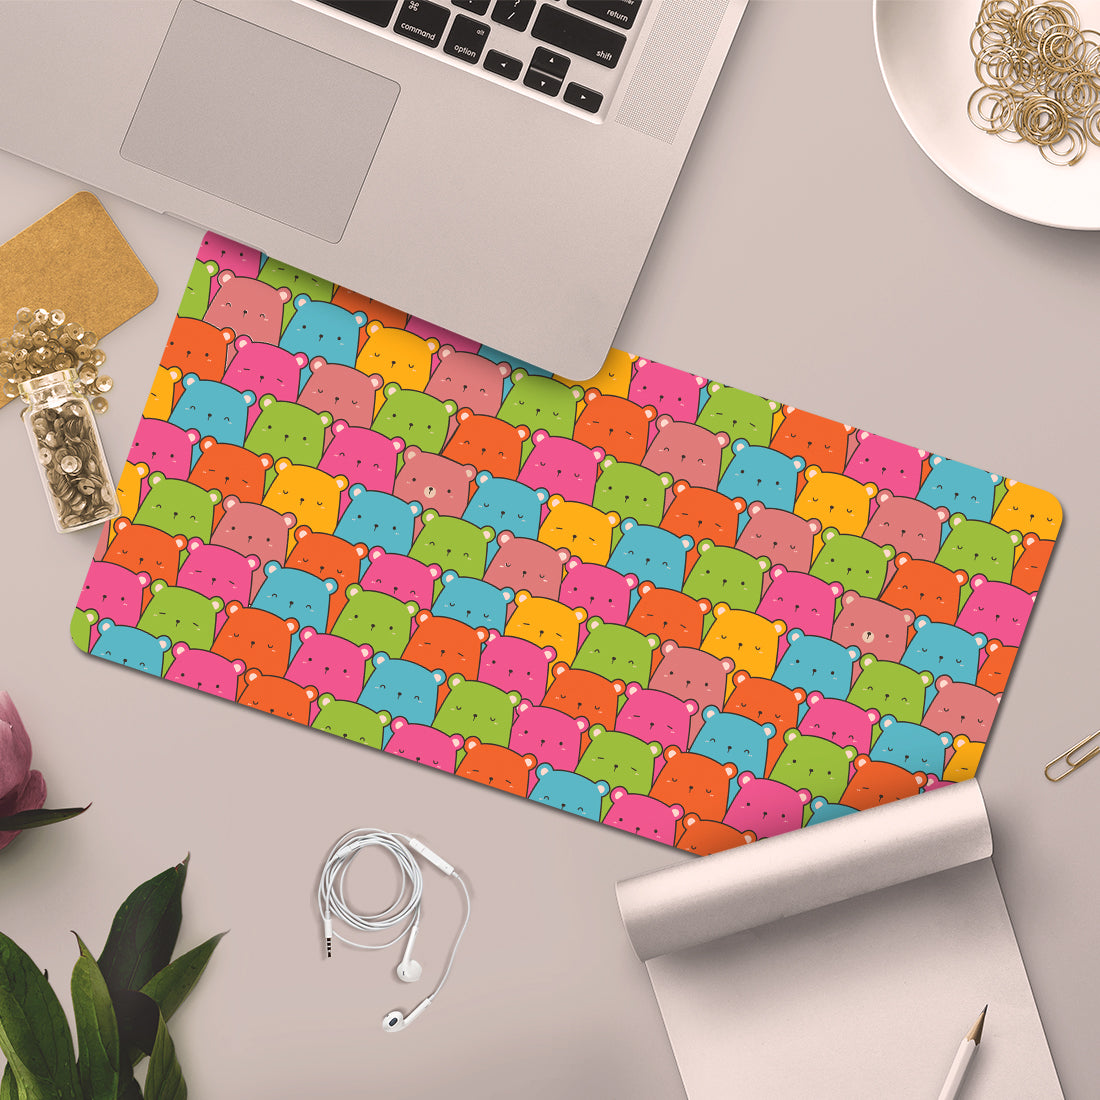 Desk Mat | Travel Friendly | 60 (w) x 30 (h) CM | Anti Slippery | Spacious for Desk | Rubber Bottom | Water Resistant | Multicolor | Easy to Clean | Illustrated (Teddy)